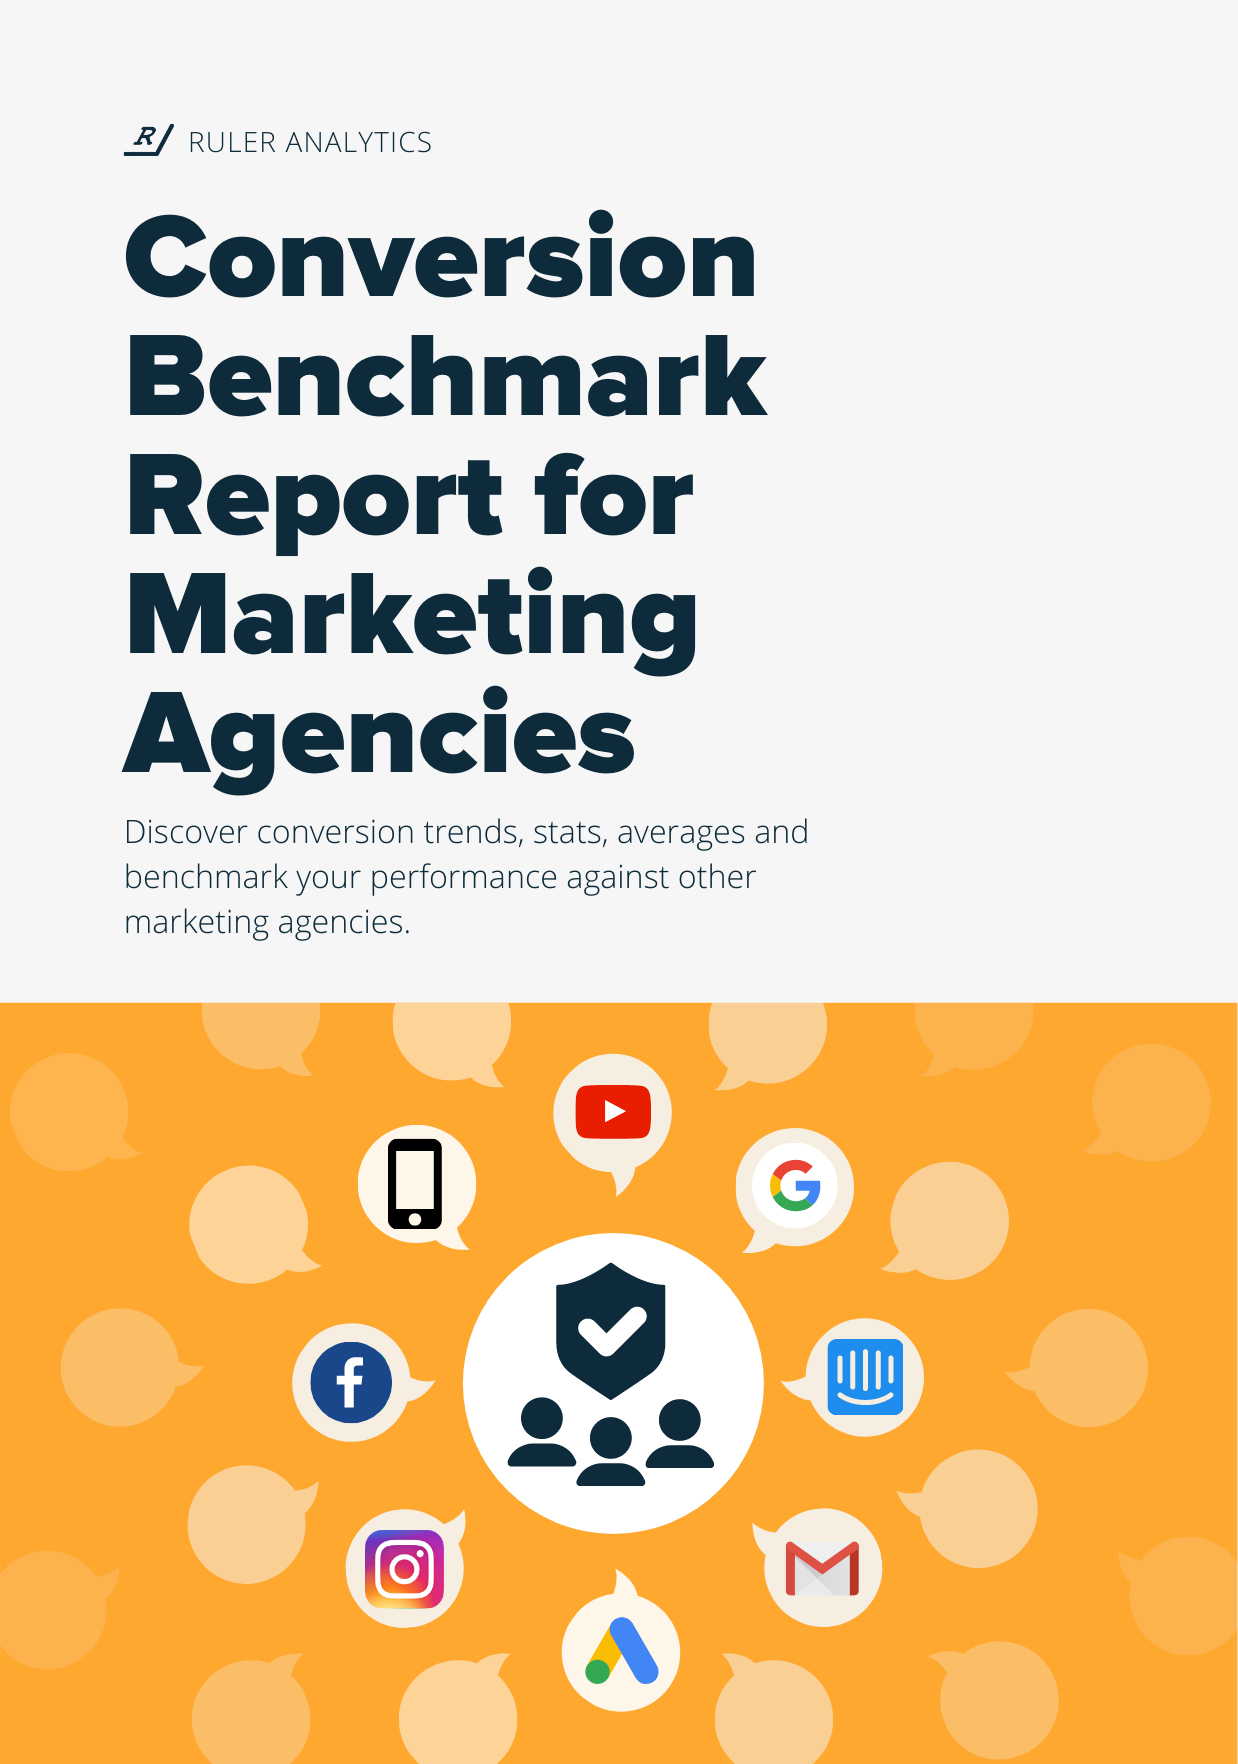 Conversion Benchmark Report for Marketing Agencies